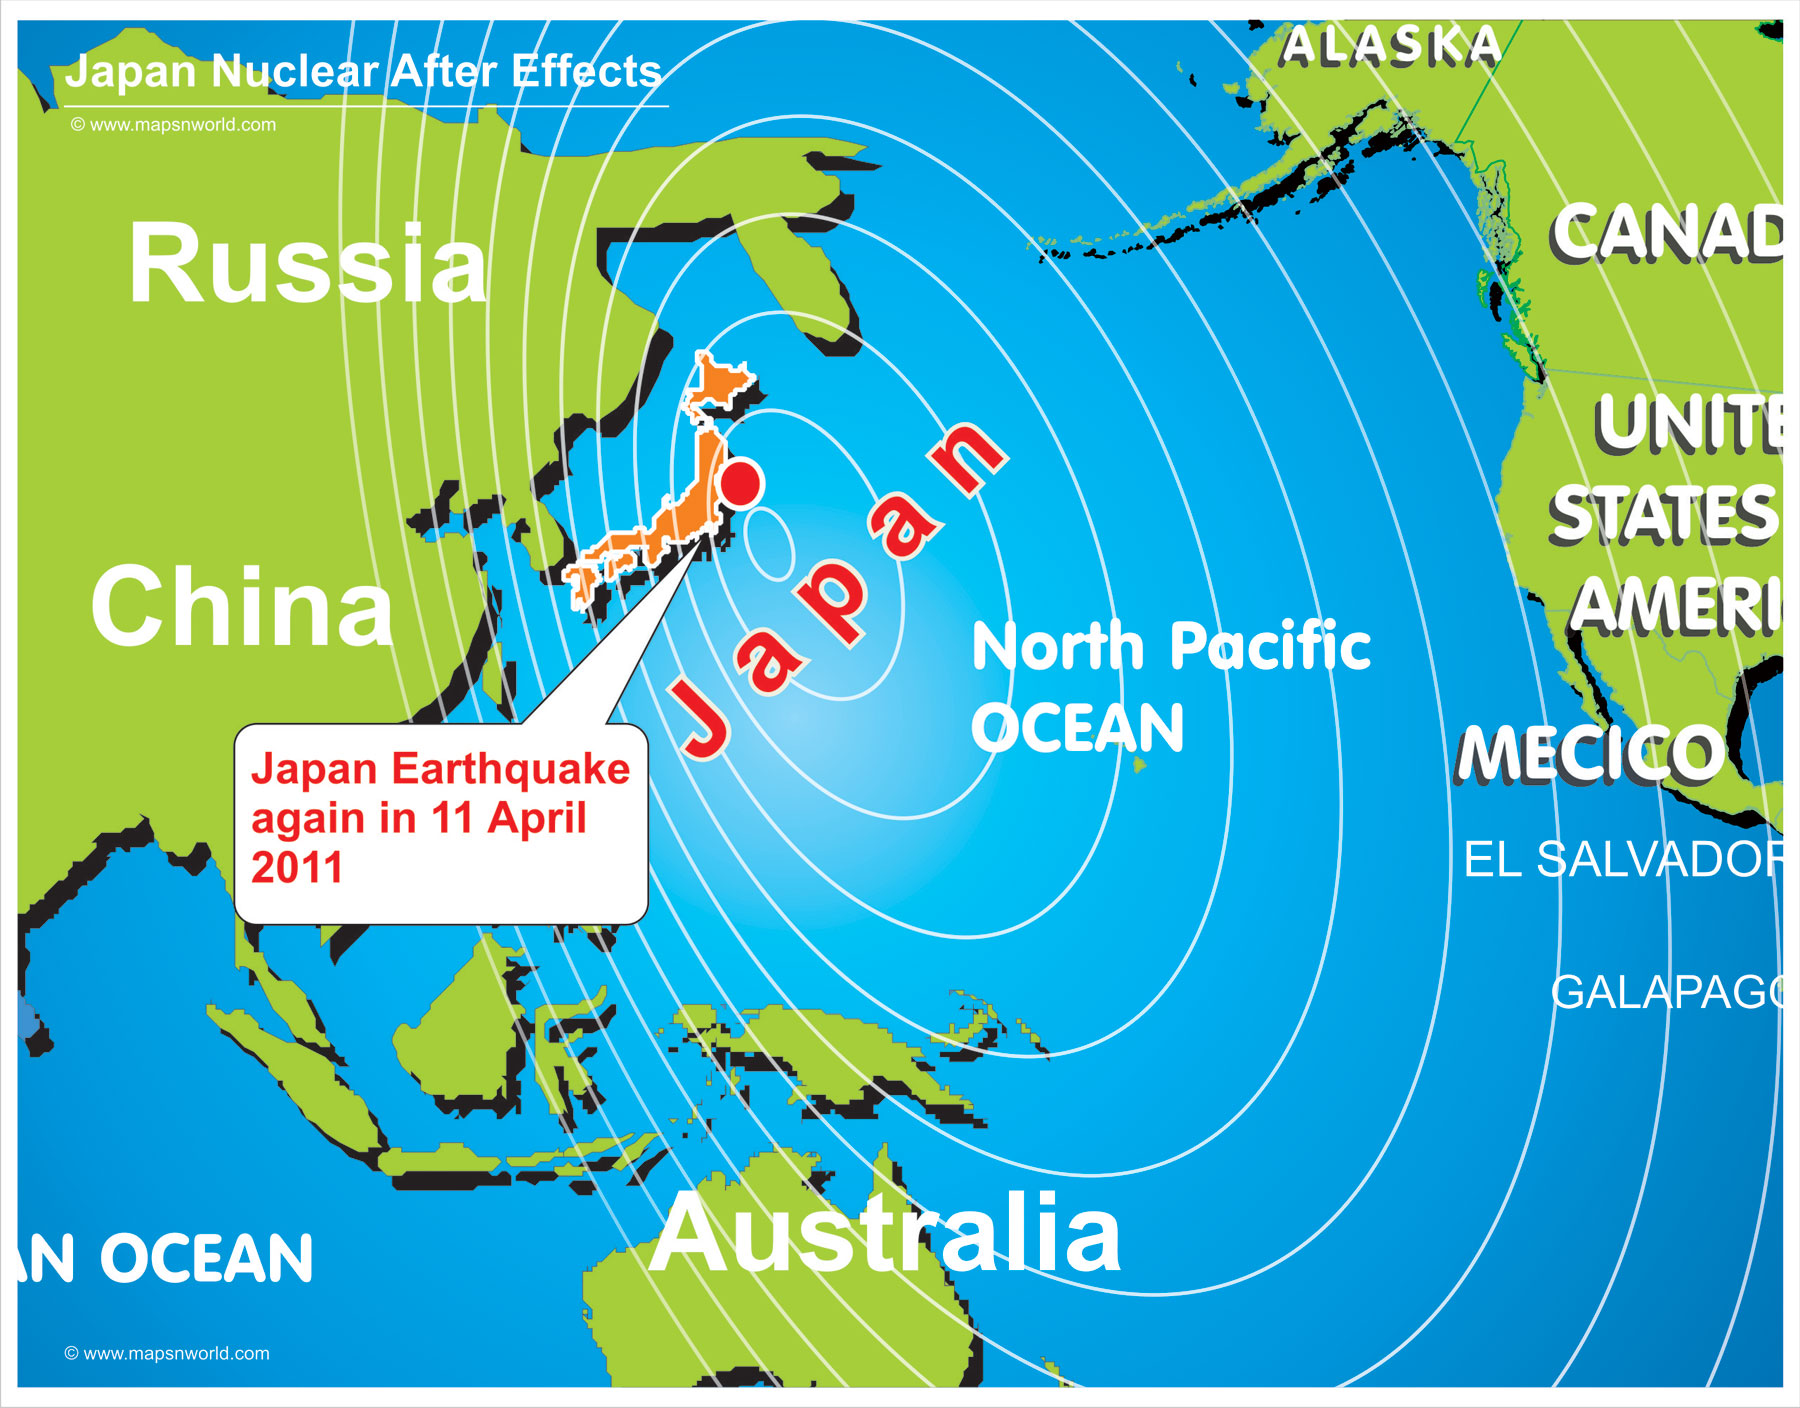 Japan Earthquake again in Japan in April 2011 with 7.1 magnitude